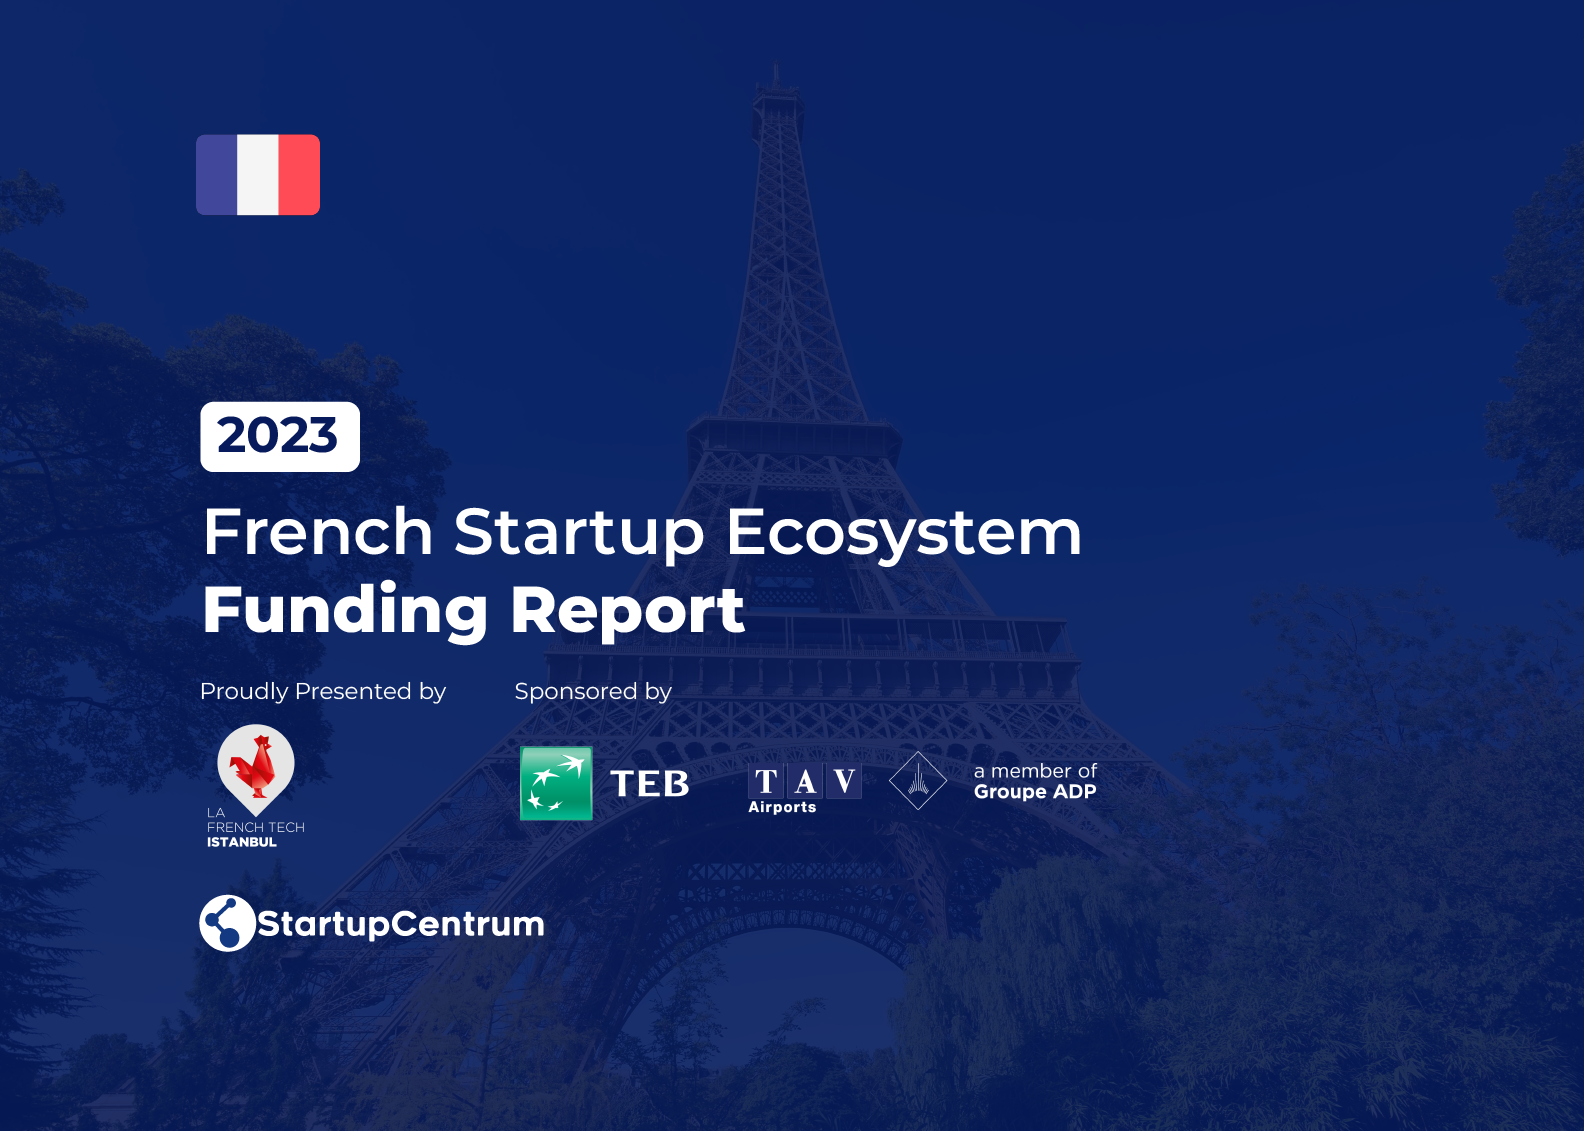 2023 - French Startup Ecosystem Funding Report Cover Image